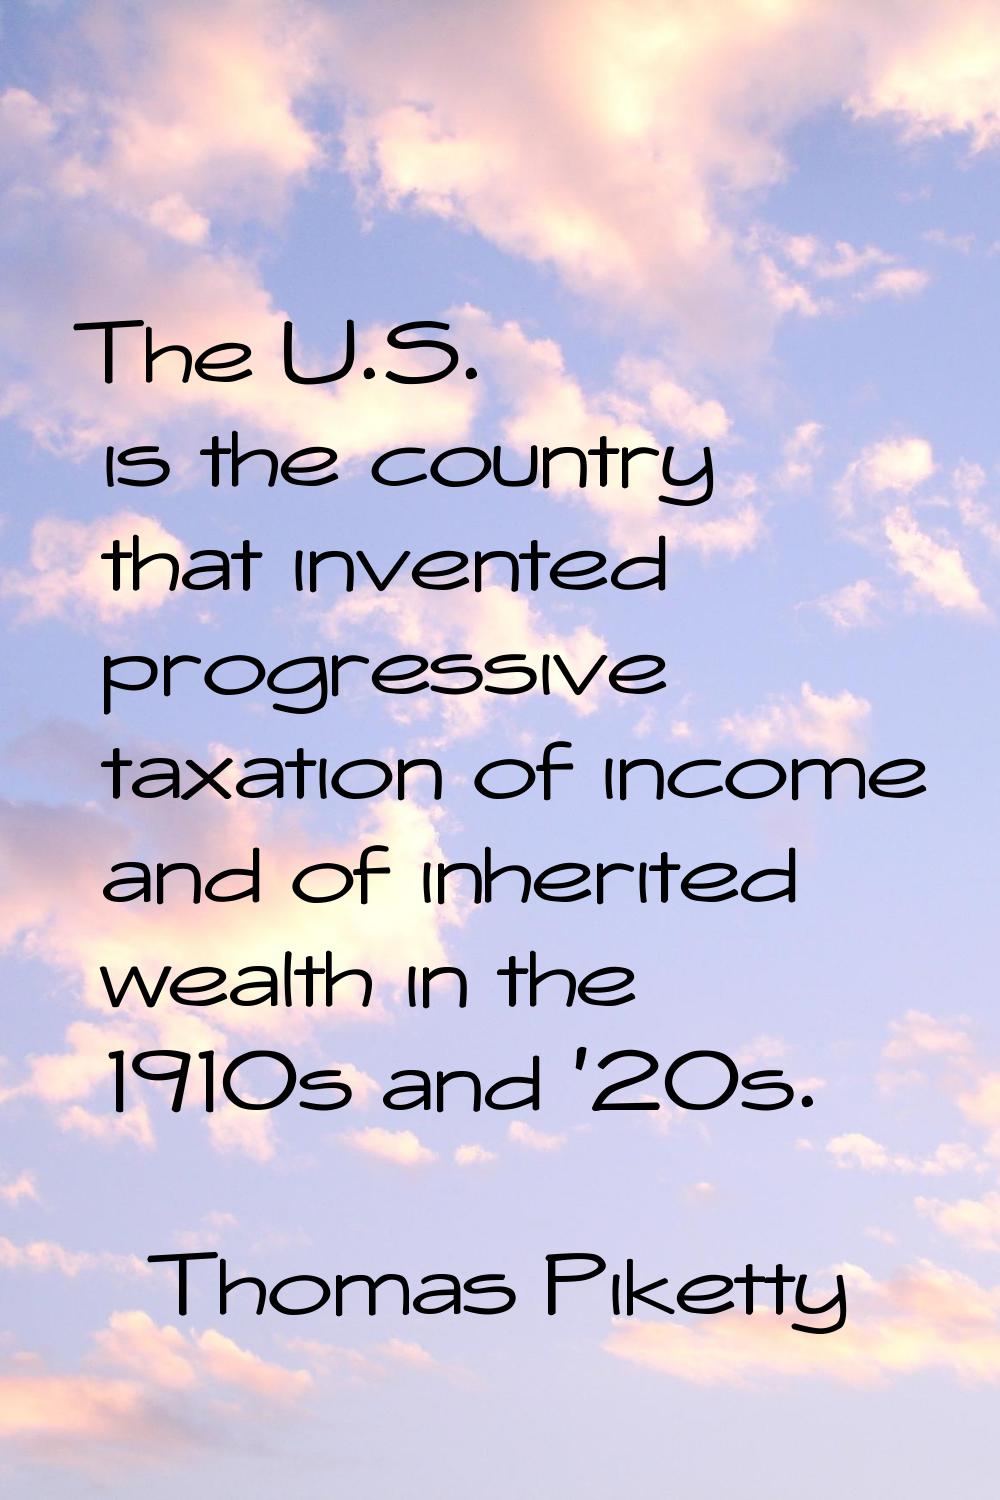 The U.S. is the country that invented progressive taxation of income and of inherited wealth in the